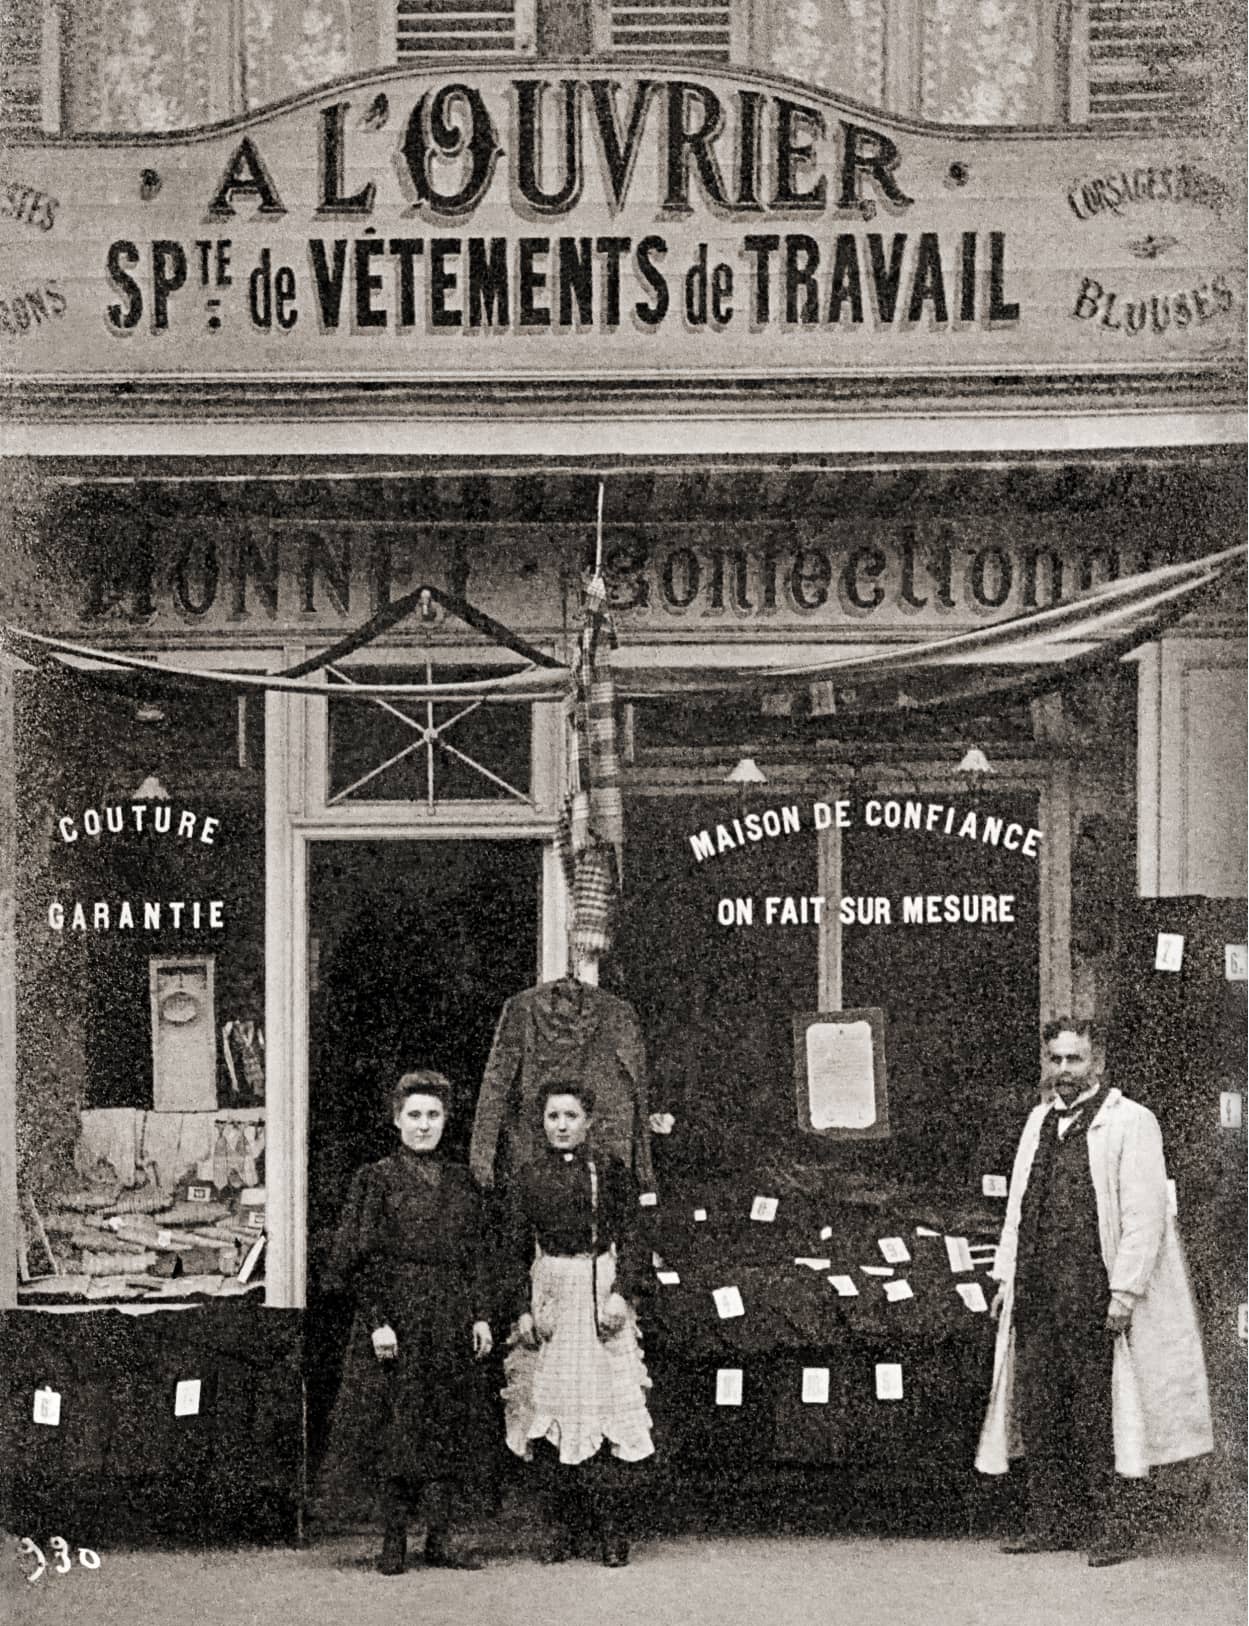 Historic picture of A L'O shop